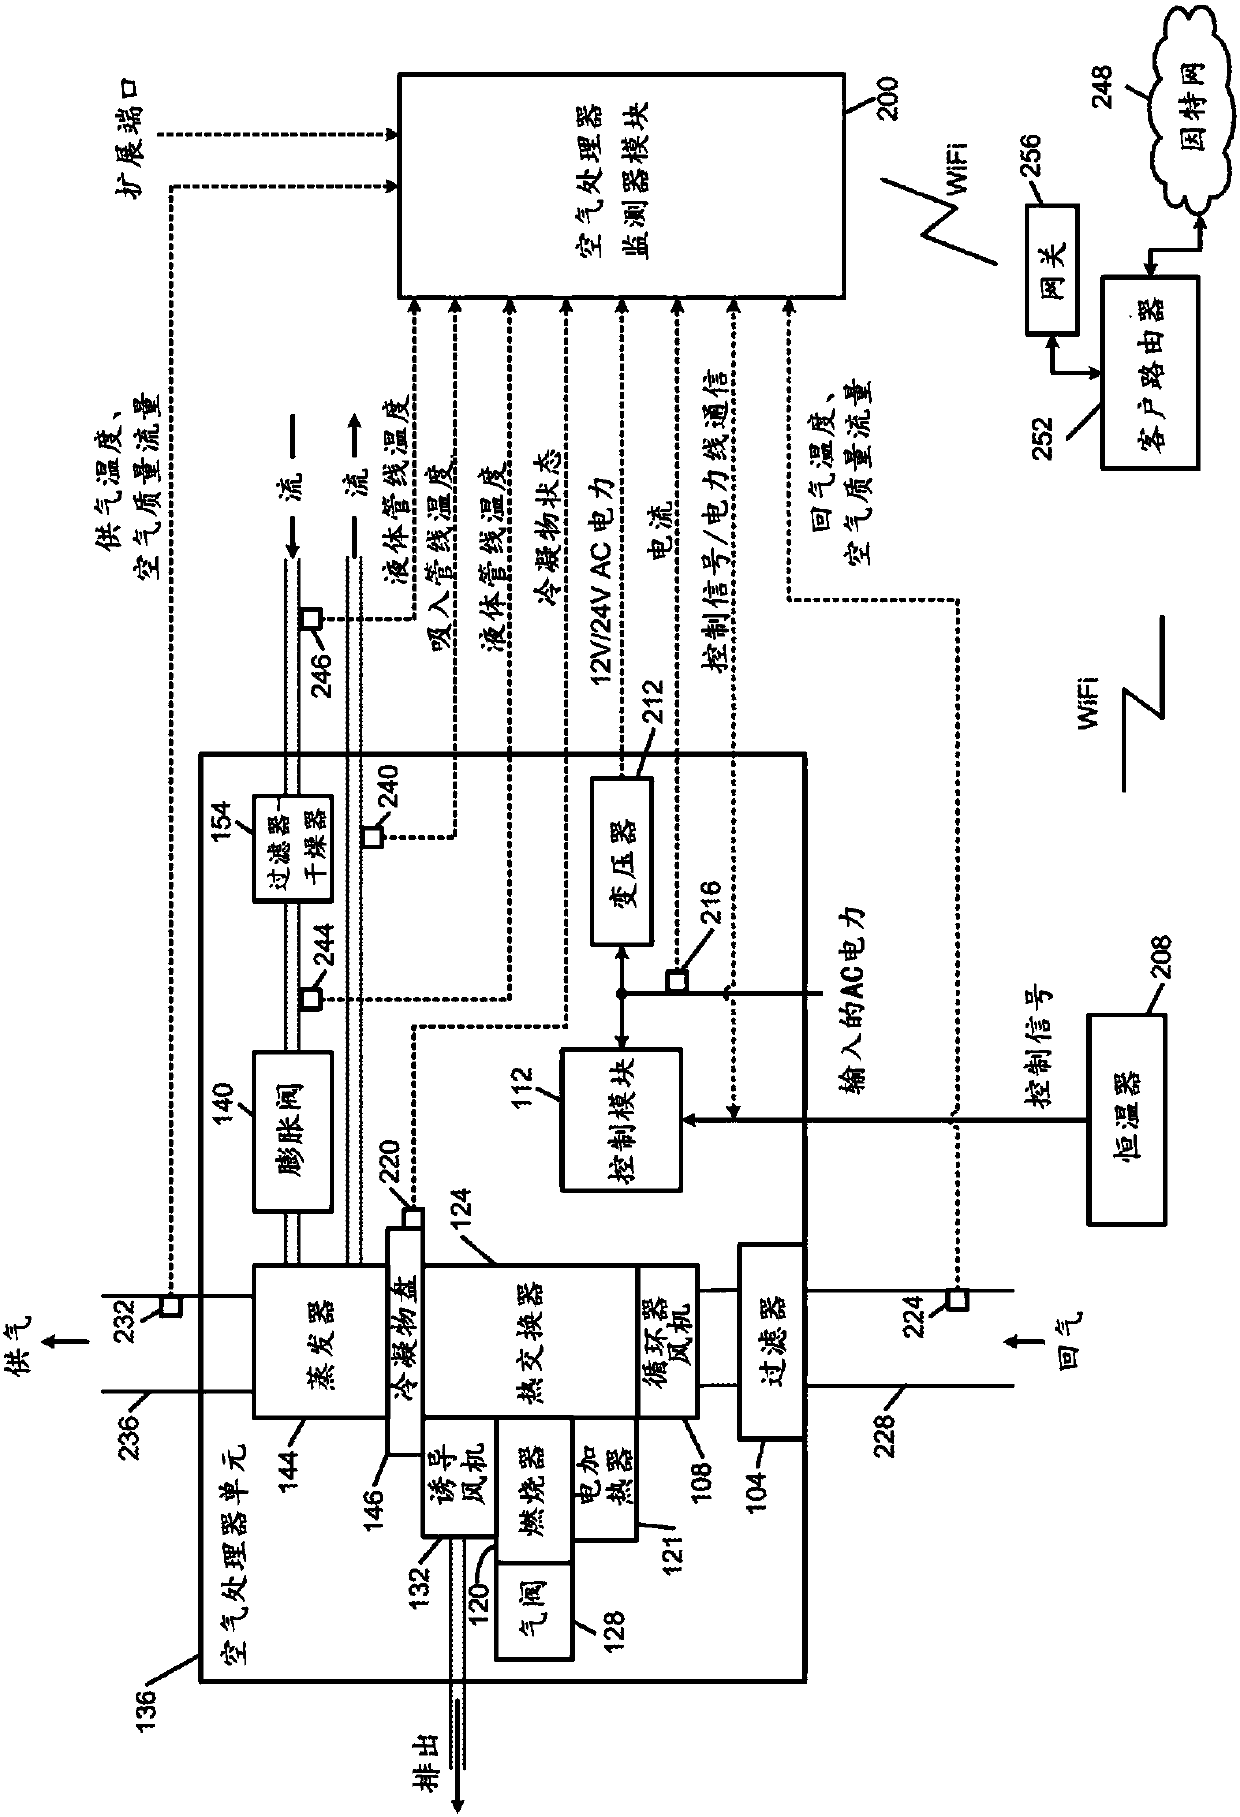 HVAC performance and energy usage monitoring and reporting system